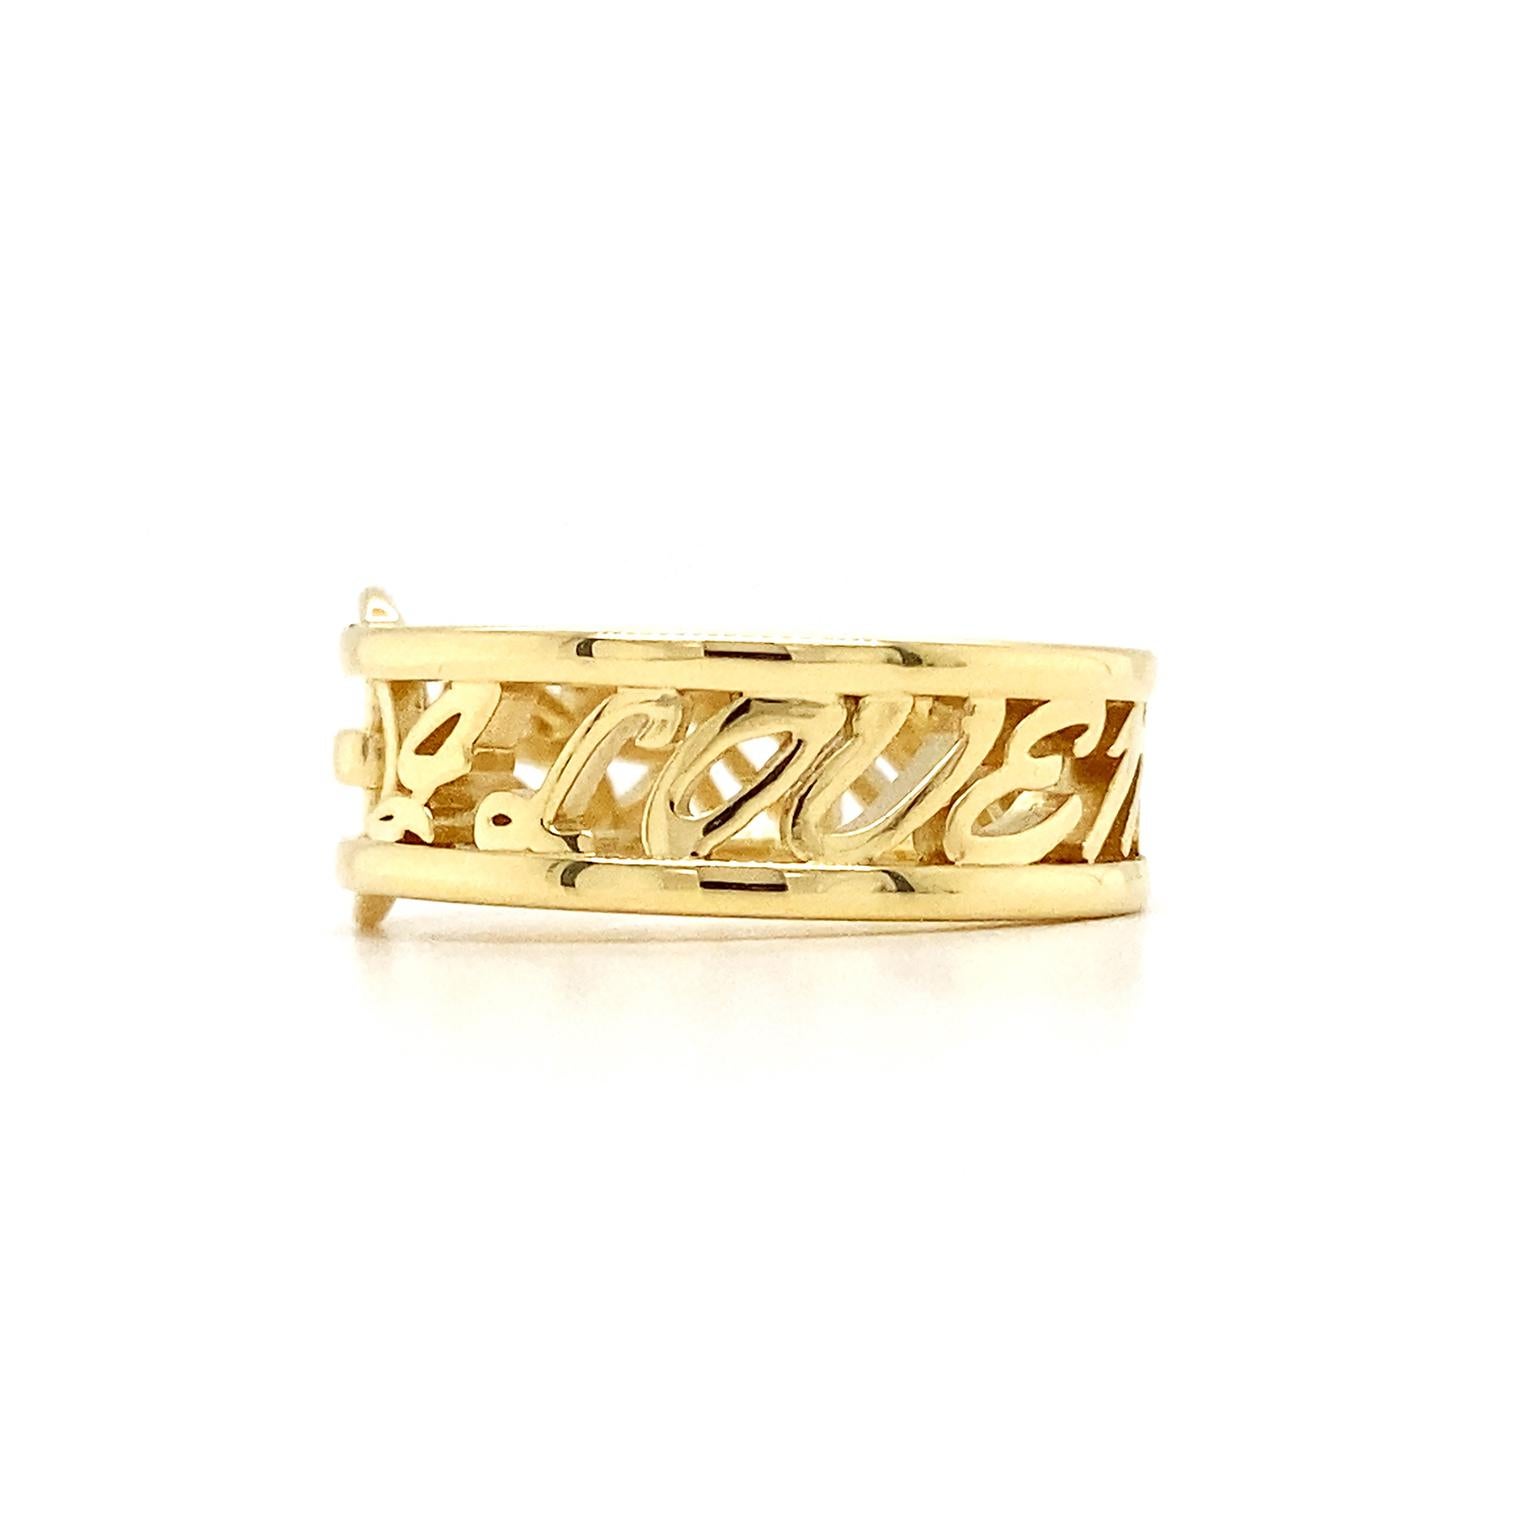 Several touches make this ring stand out. One is a buckle, complete with a bar, prong, and oval frame. The words 'I love me more' span the rest of the band, with cursive letters traveling between thin shanks. Taken together, the buckle turns the